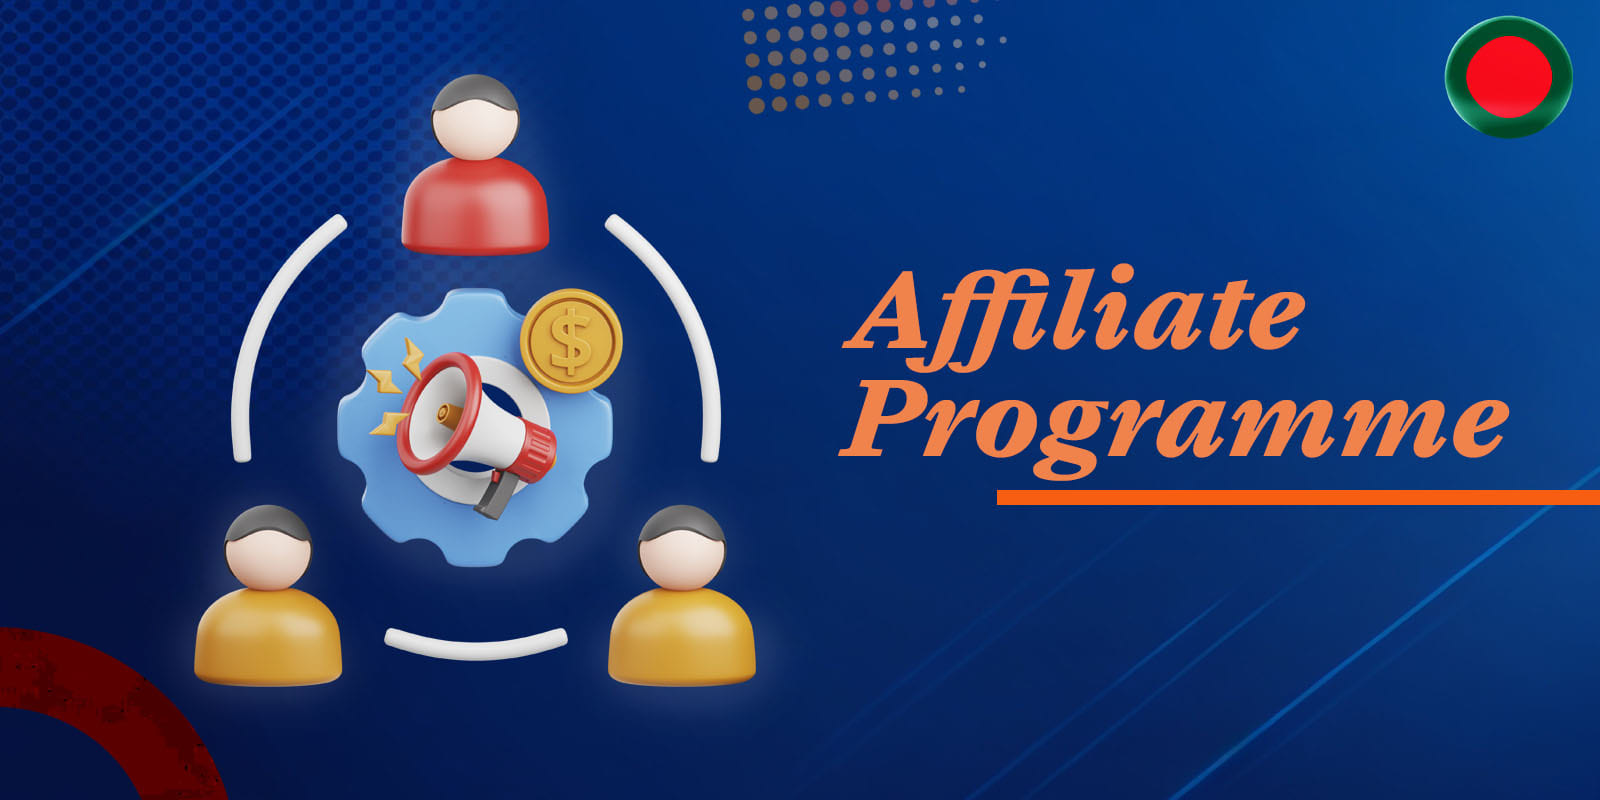 About the affiliate programme